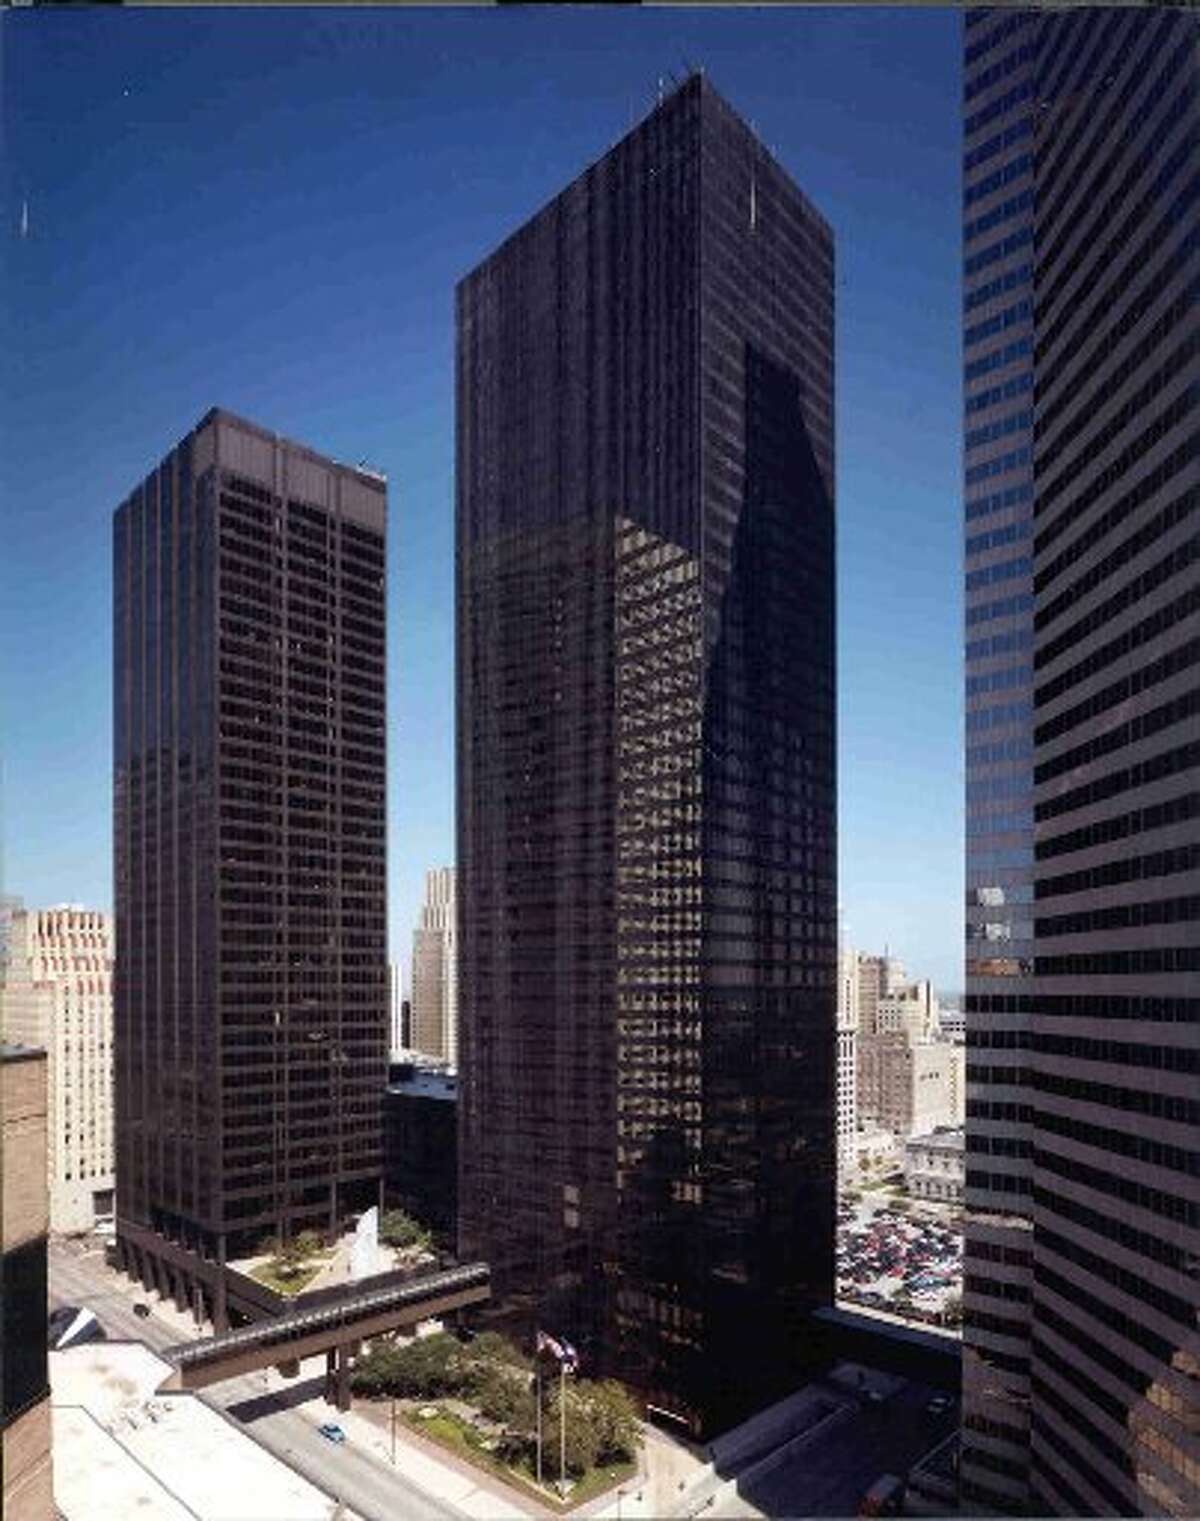 Reed Smith will occupy the 21st and 22nd floors of the 46-story LyondellBasell Tower.